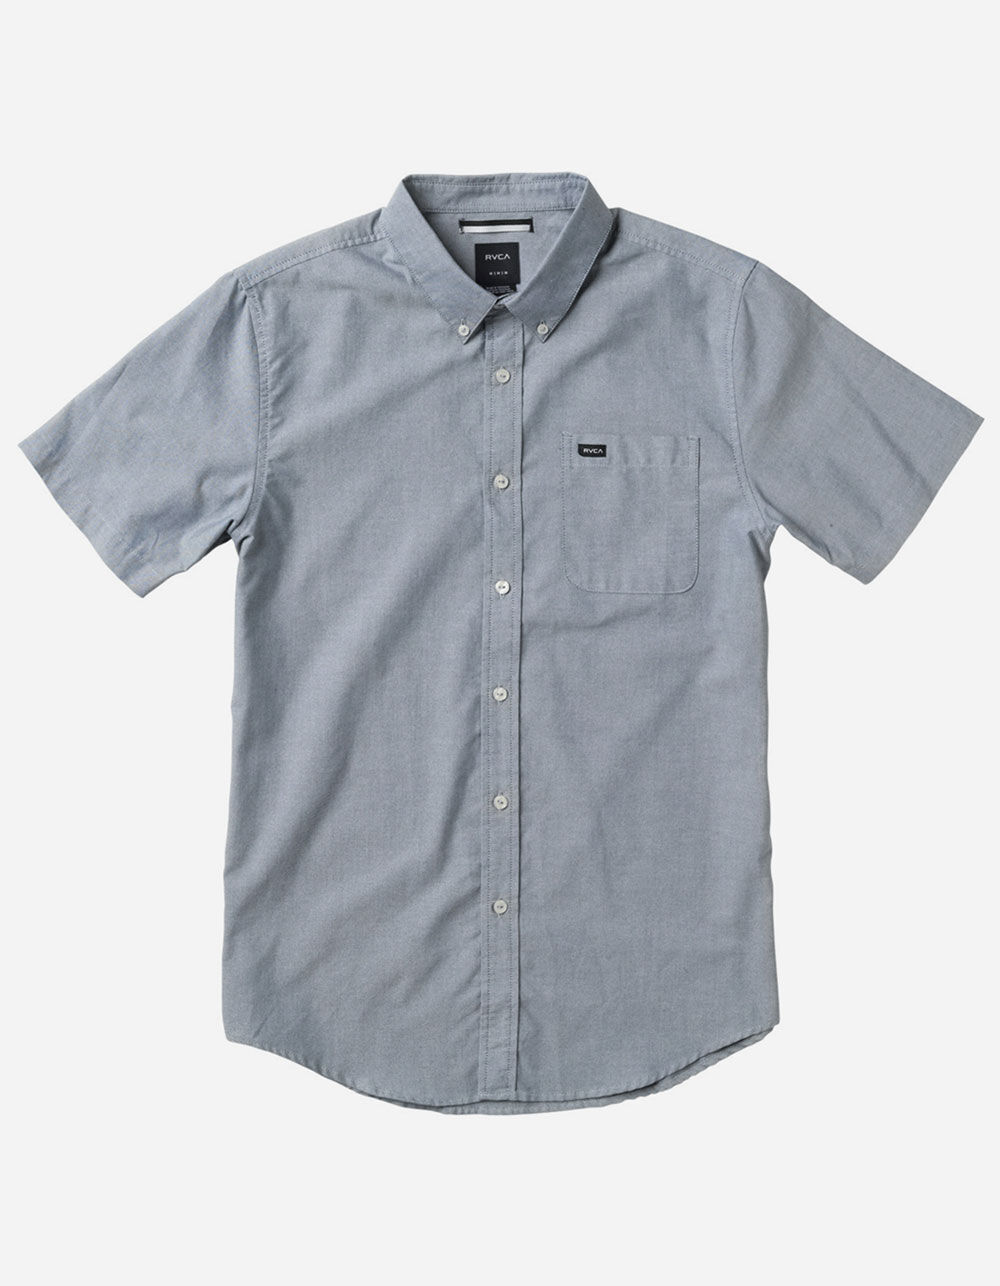 RVCA That'll Do Oxford Mens Shirt image number 0